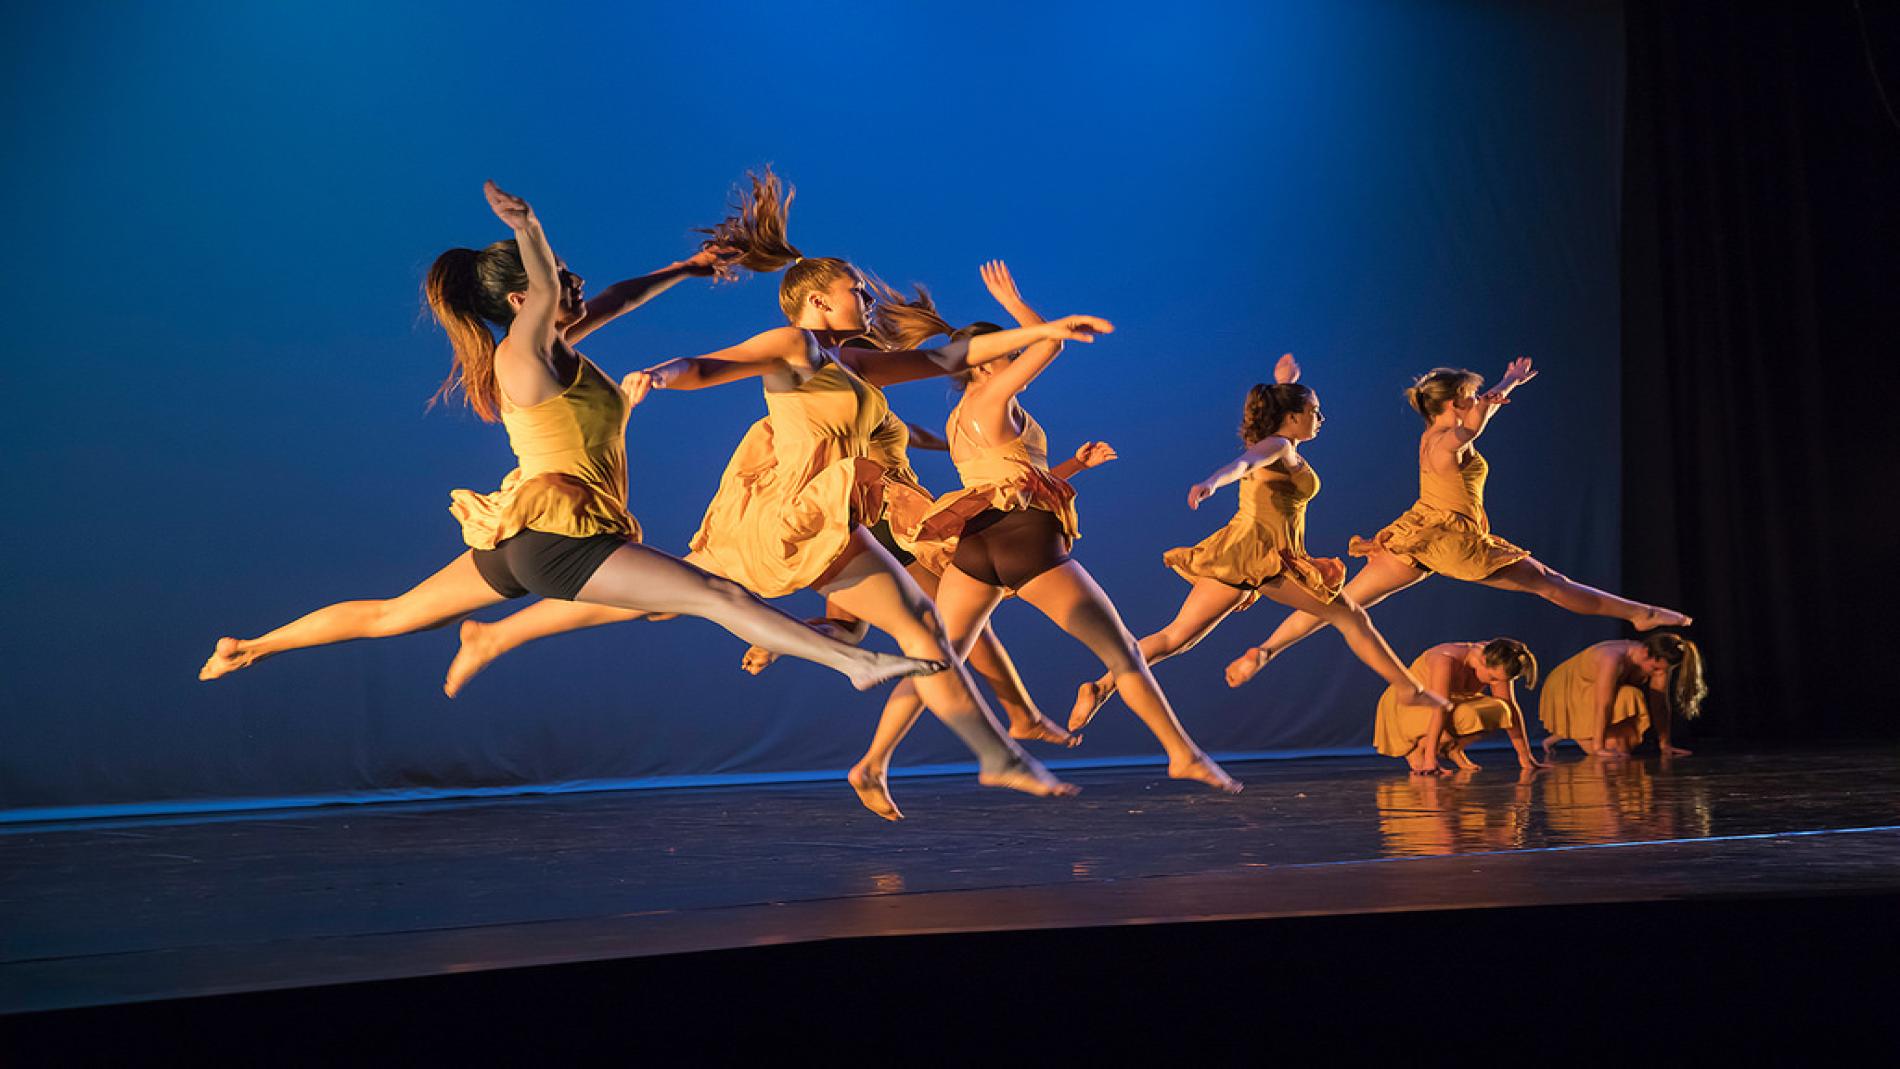 Dancers leap across the stage